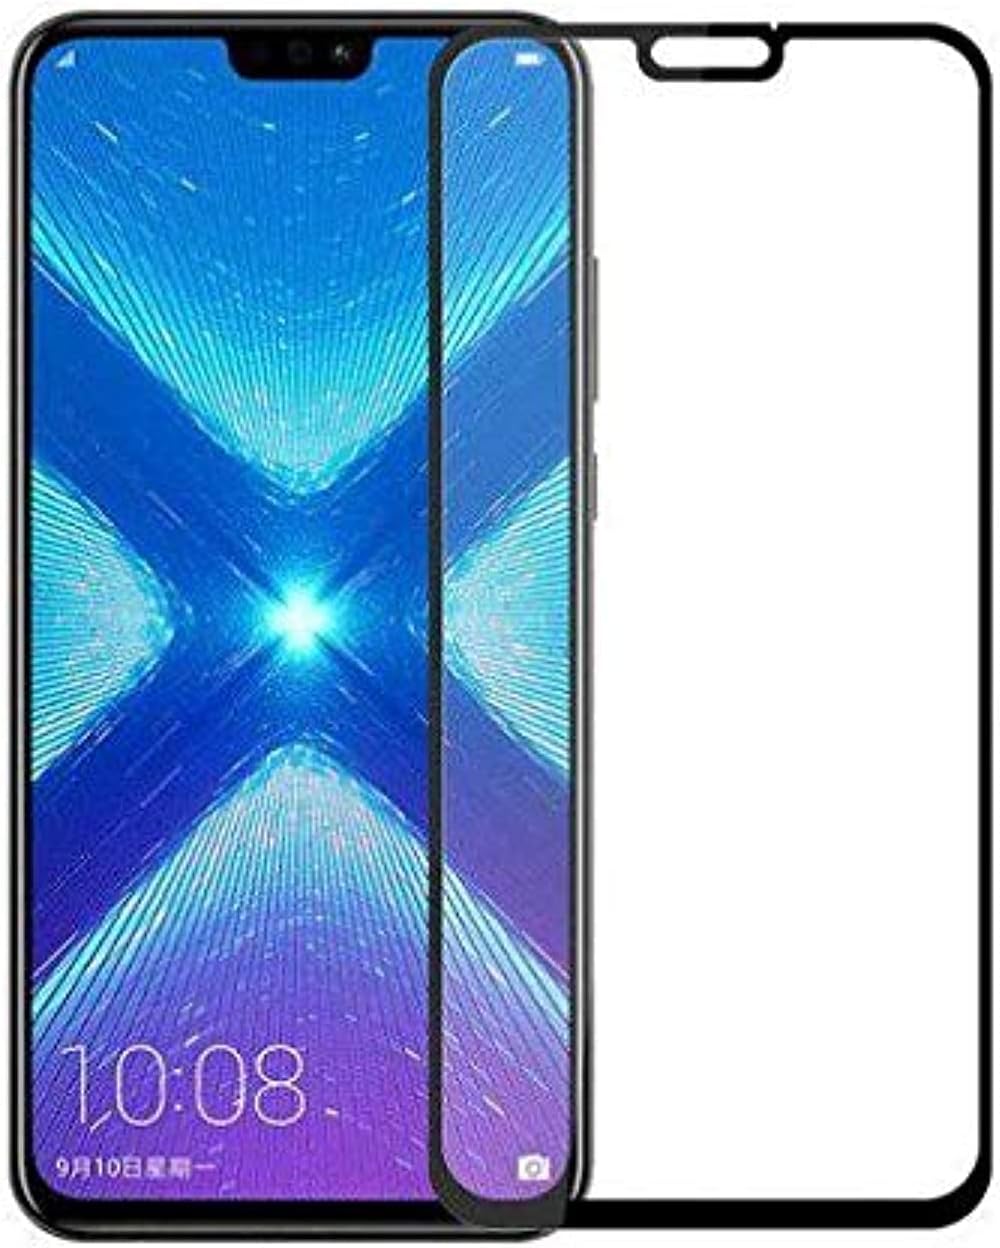 Tempered Glass Screen Protector for Huawei Y9 2019 - Transparent with Black Frame